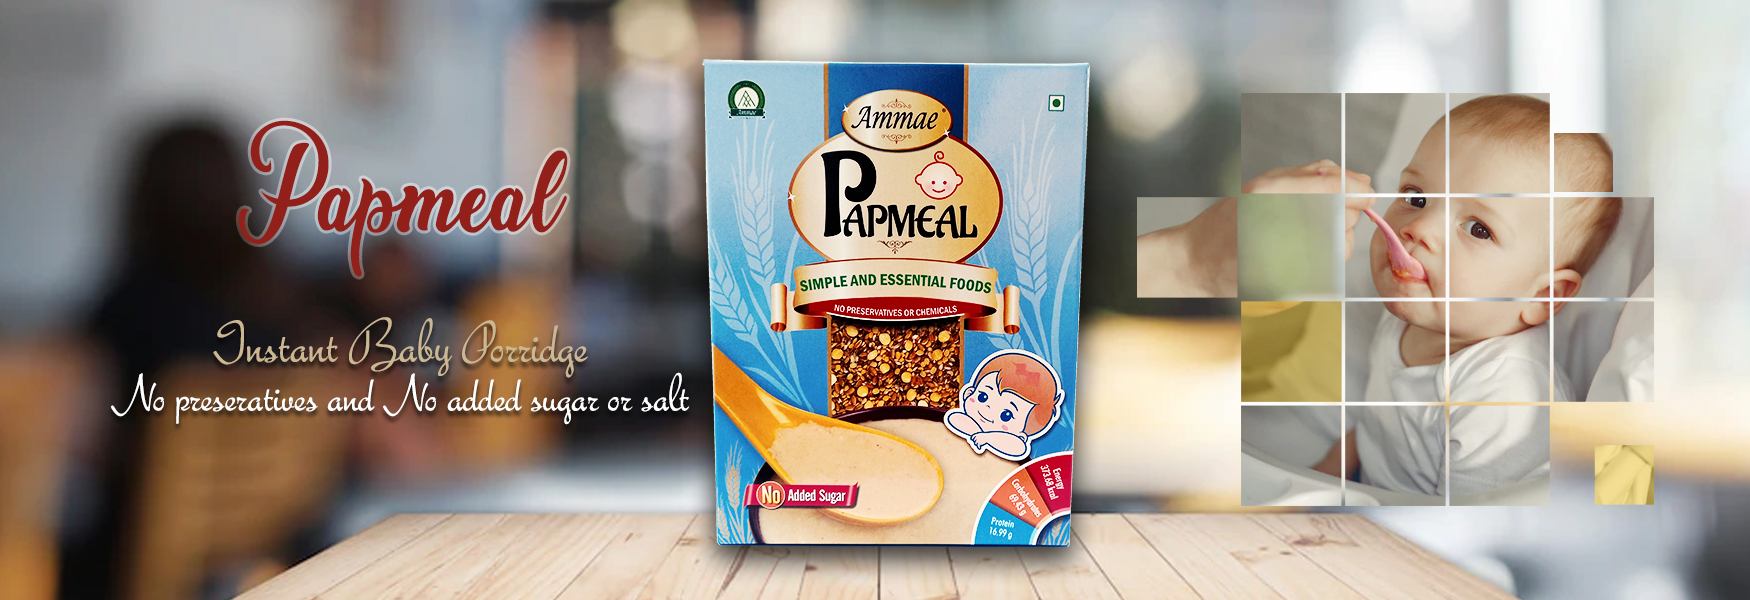 Ammae Papmeal | Papmeal - Ammae Foods India